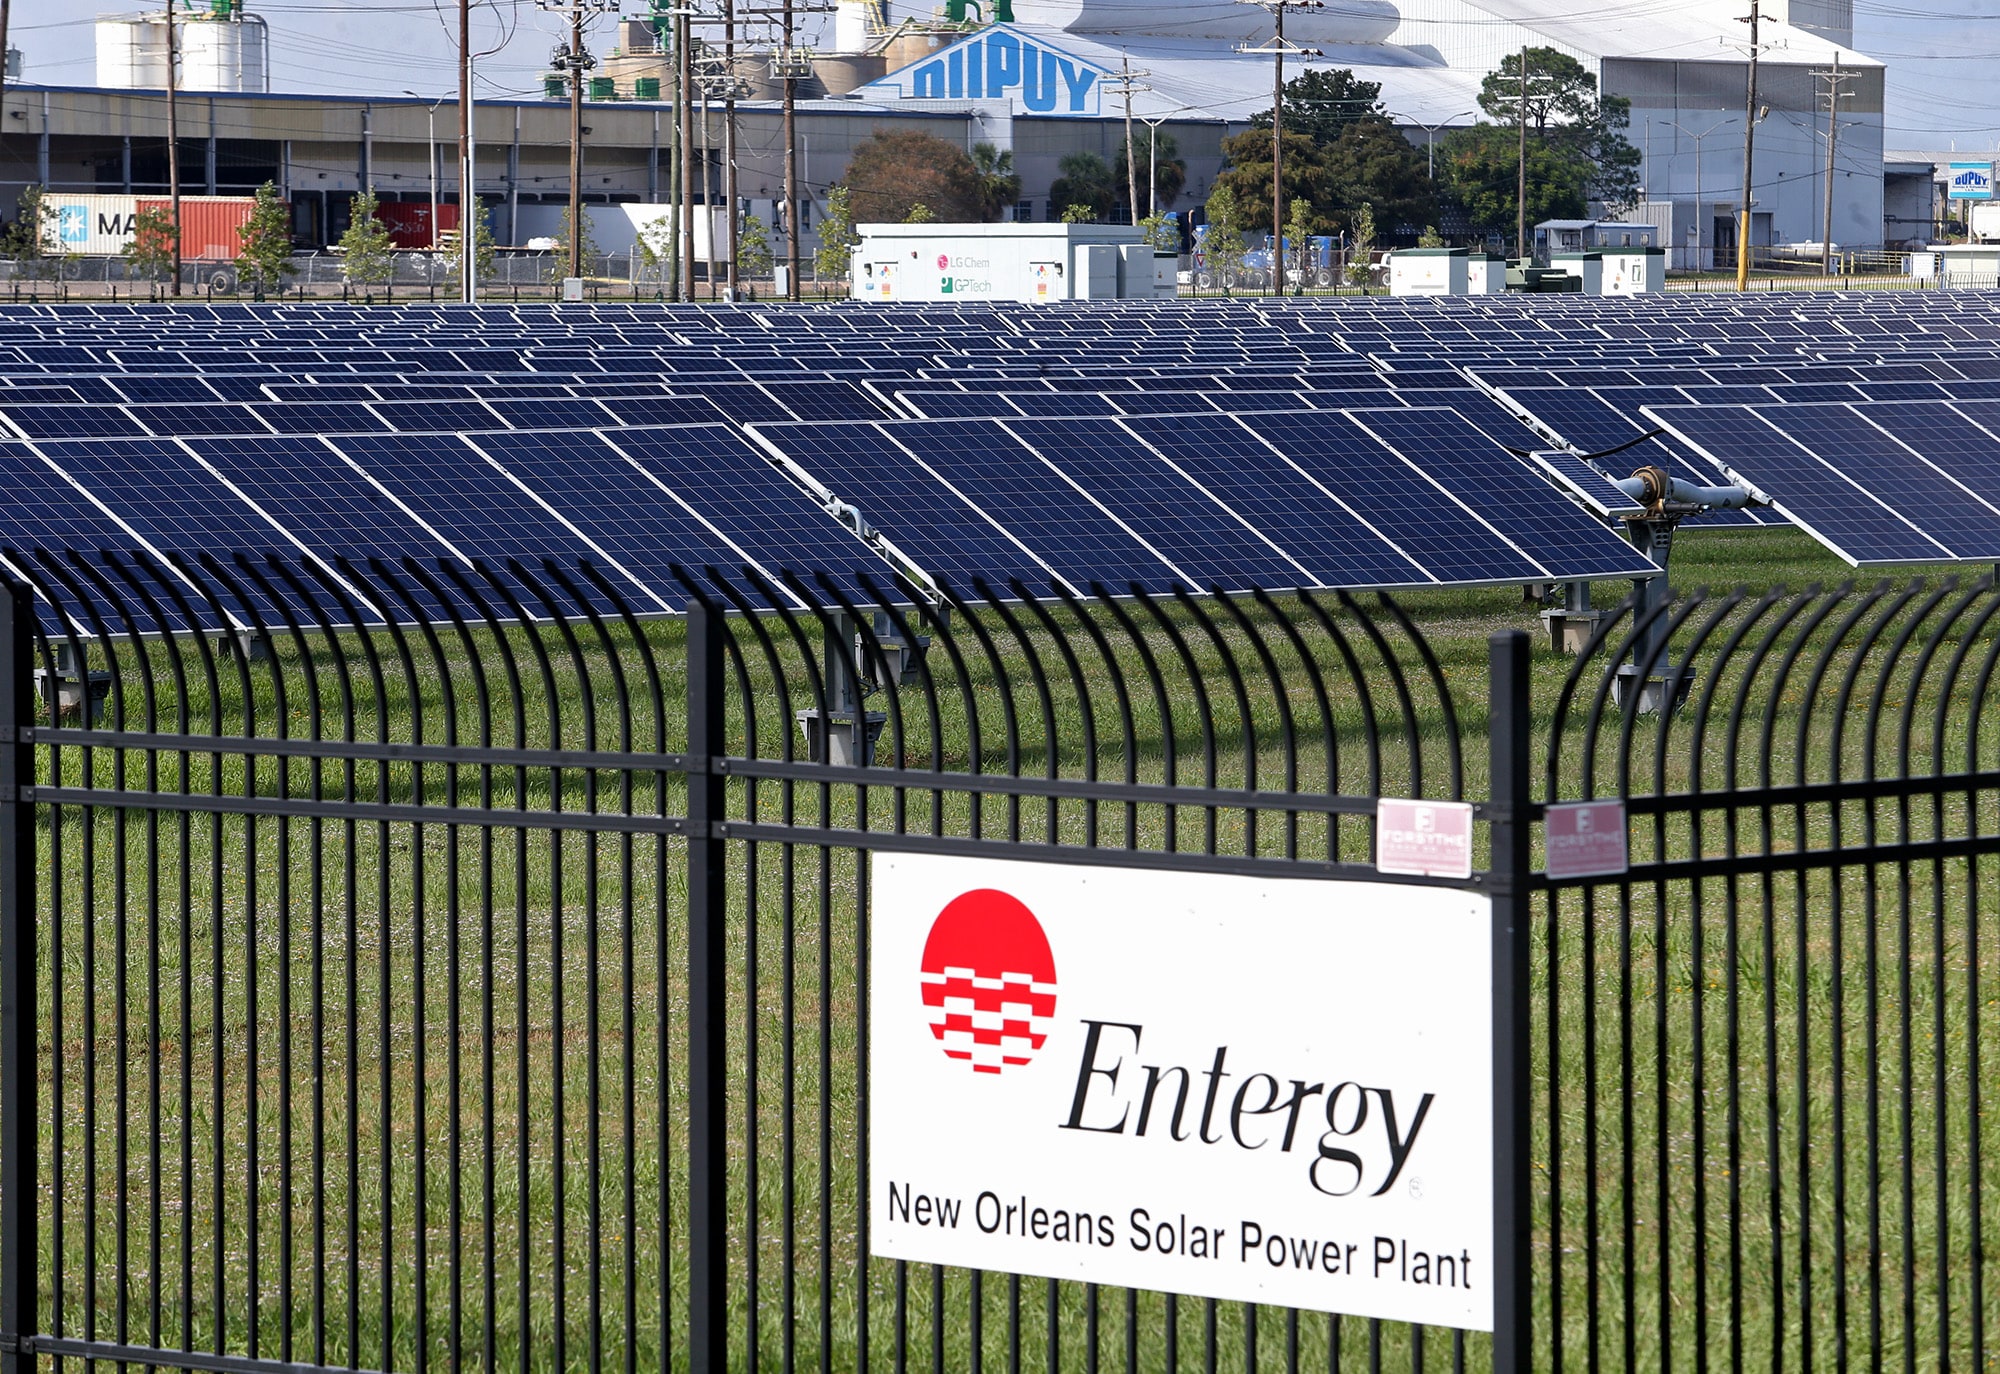 The Entergy New Orleans Solar Power Plant in New Orleans East. Photographed on Saturday, October 26, 2019. (Photo by Michael DeMocker)